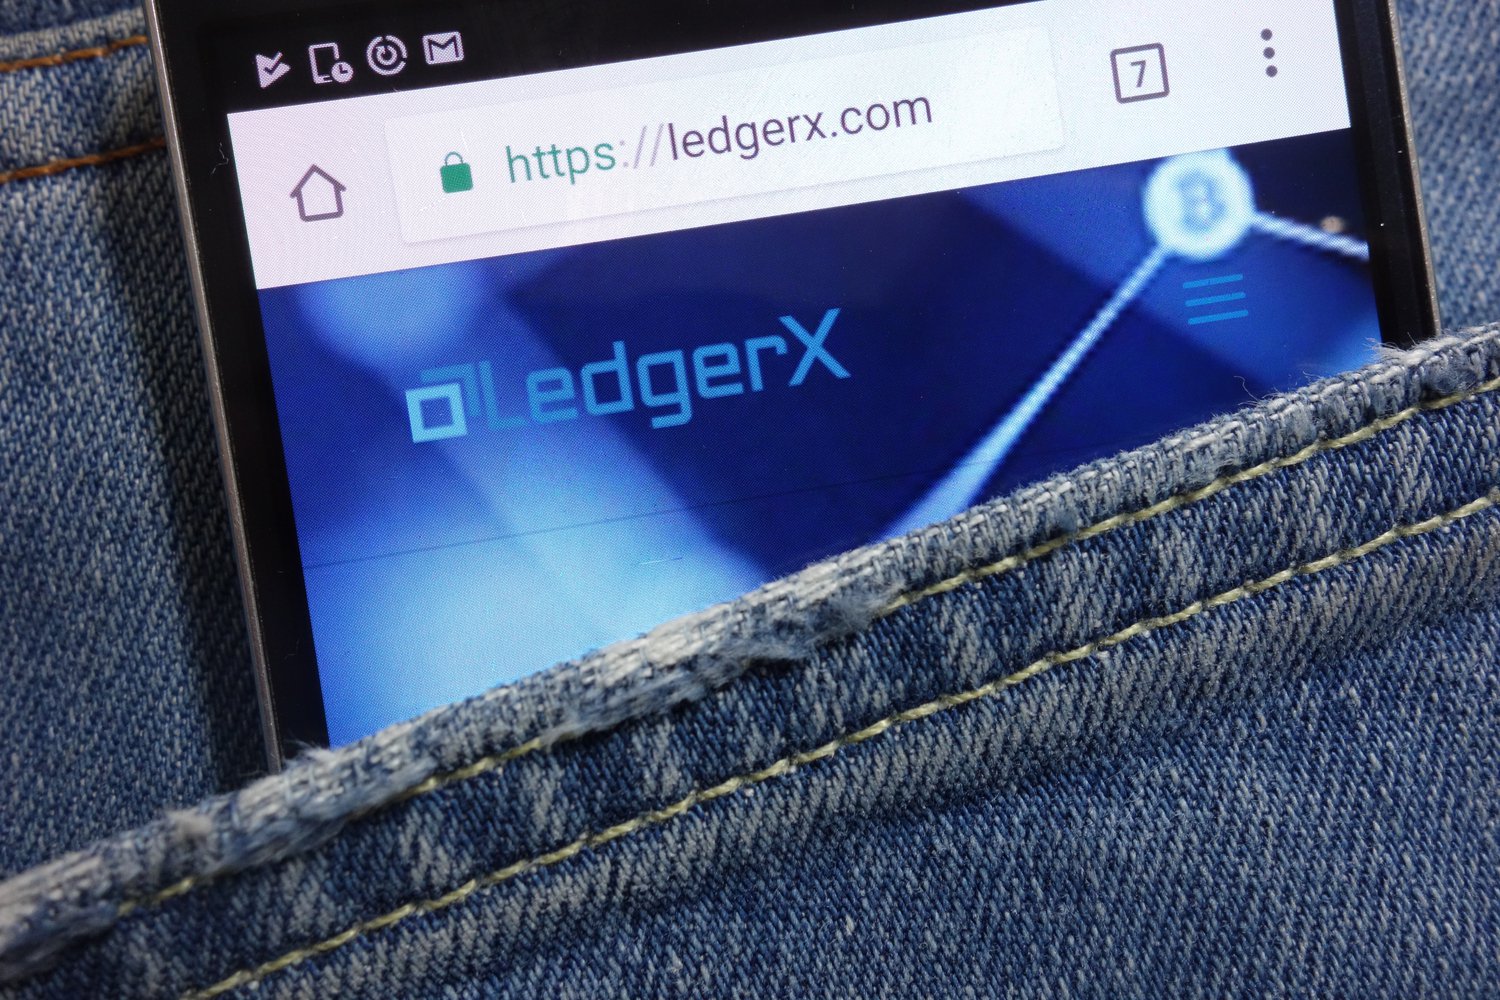 LedgerX Claims ‘Record’ July For Bitcoin Options Trading